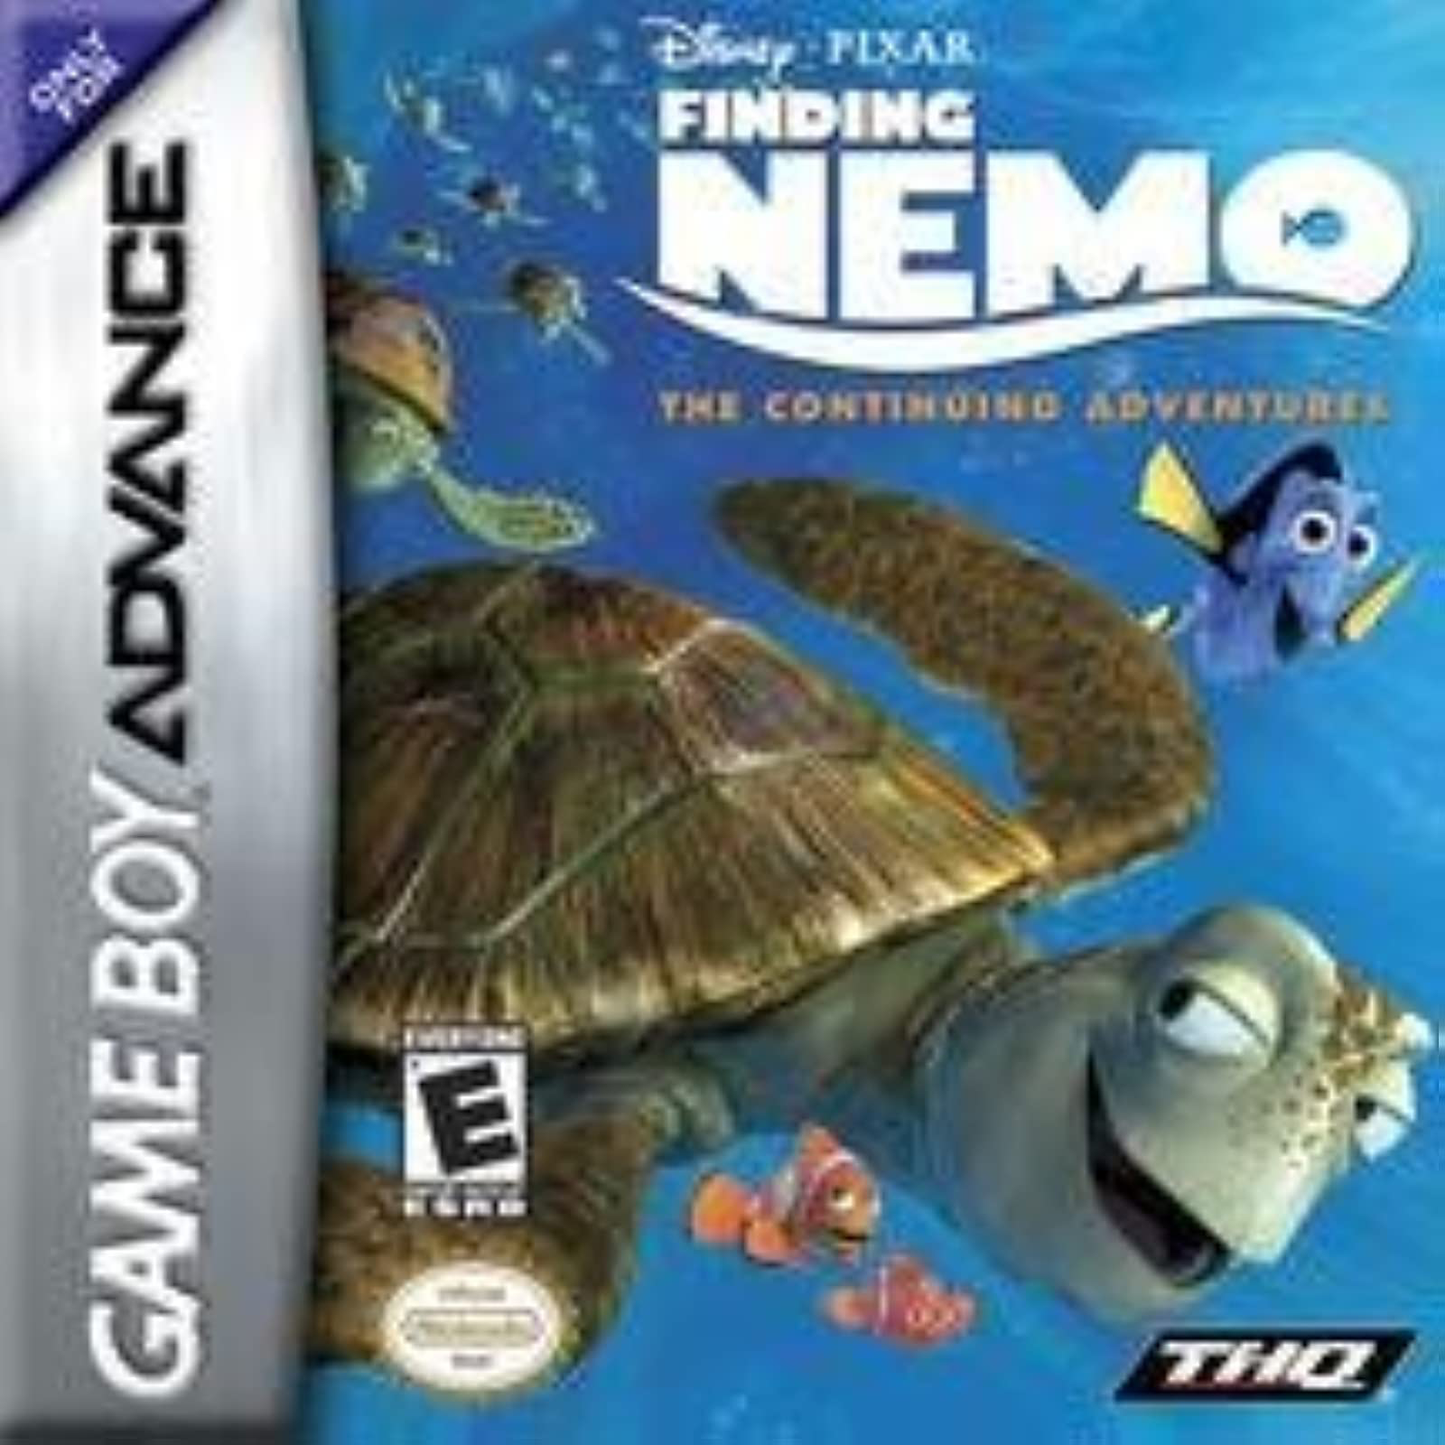 Finding Nemo The Continuing Adventures - Game Boy Advance